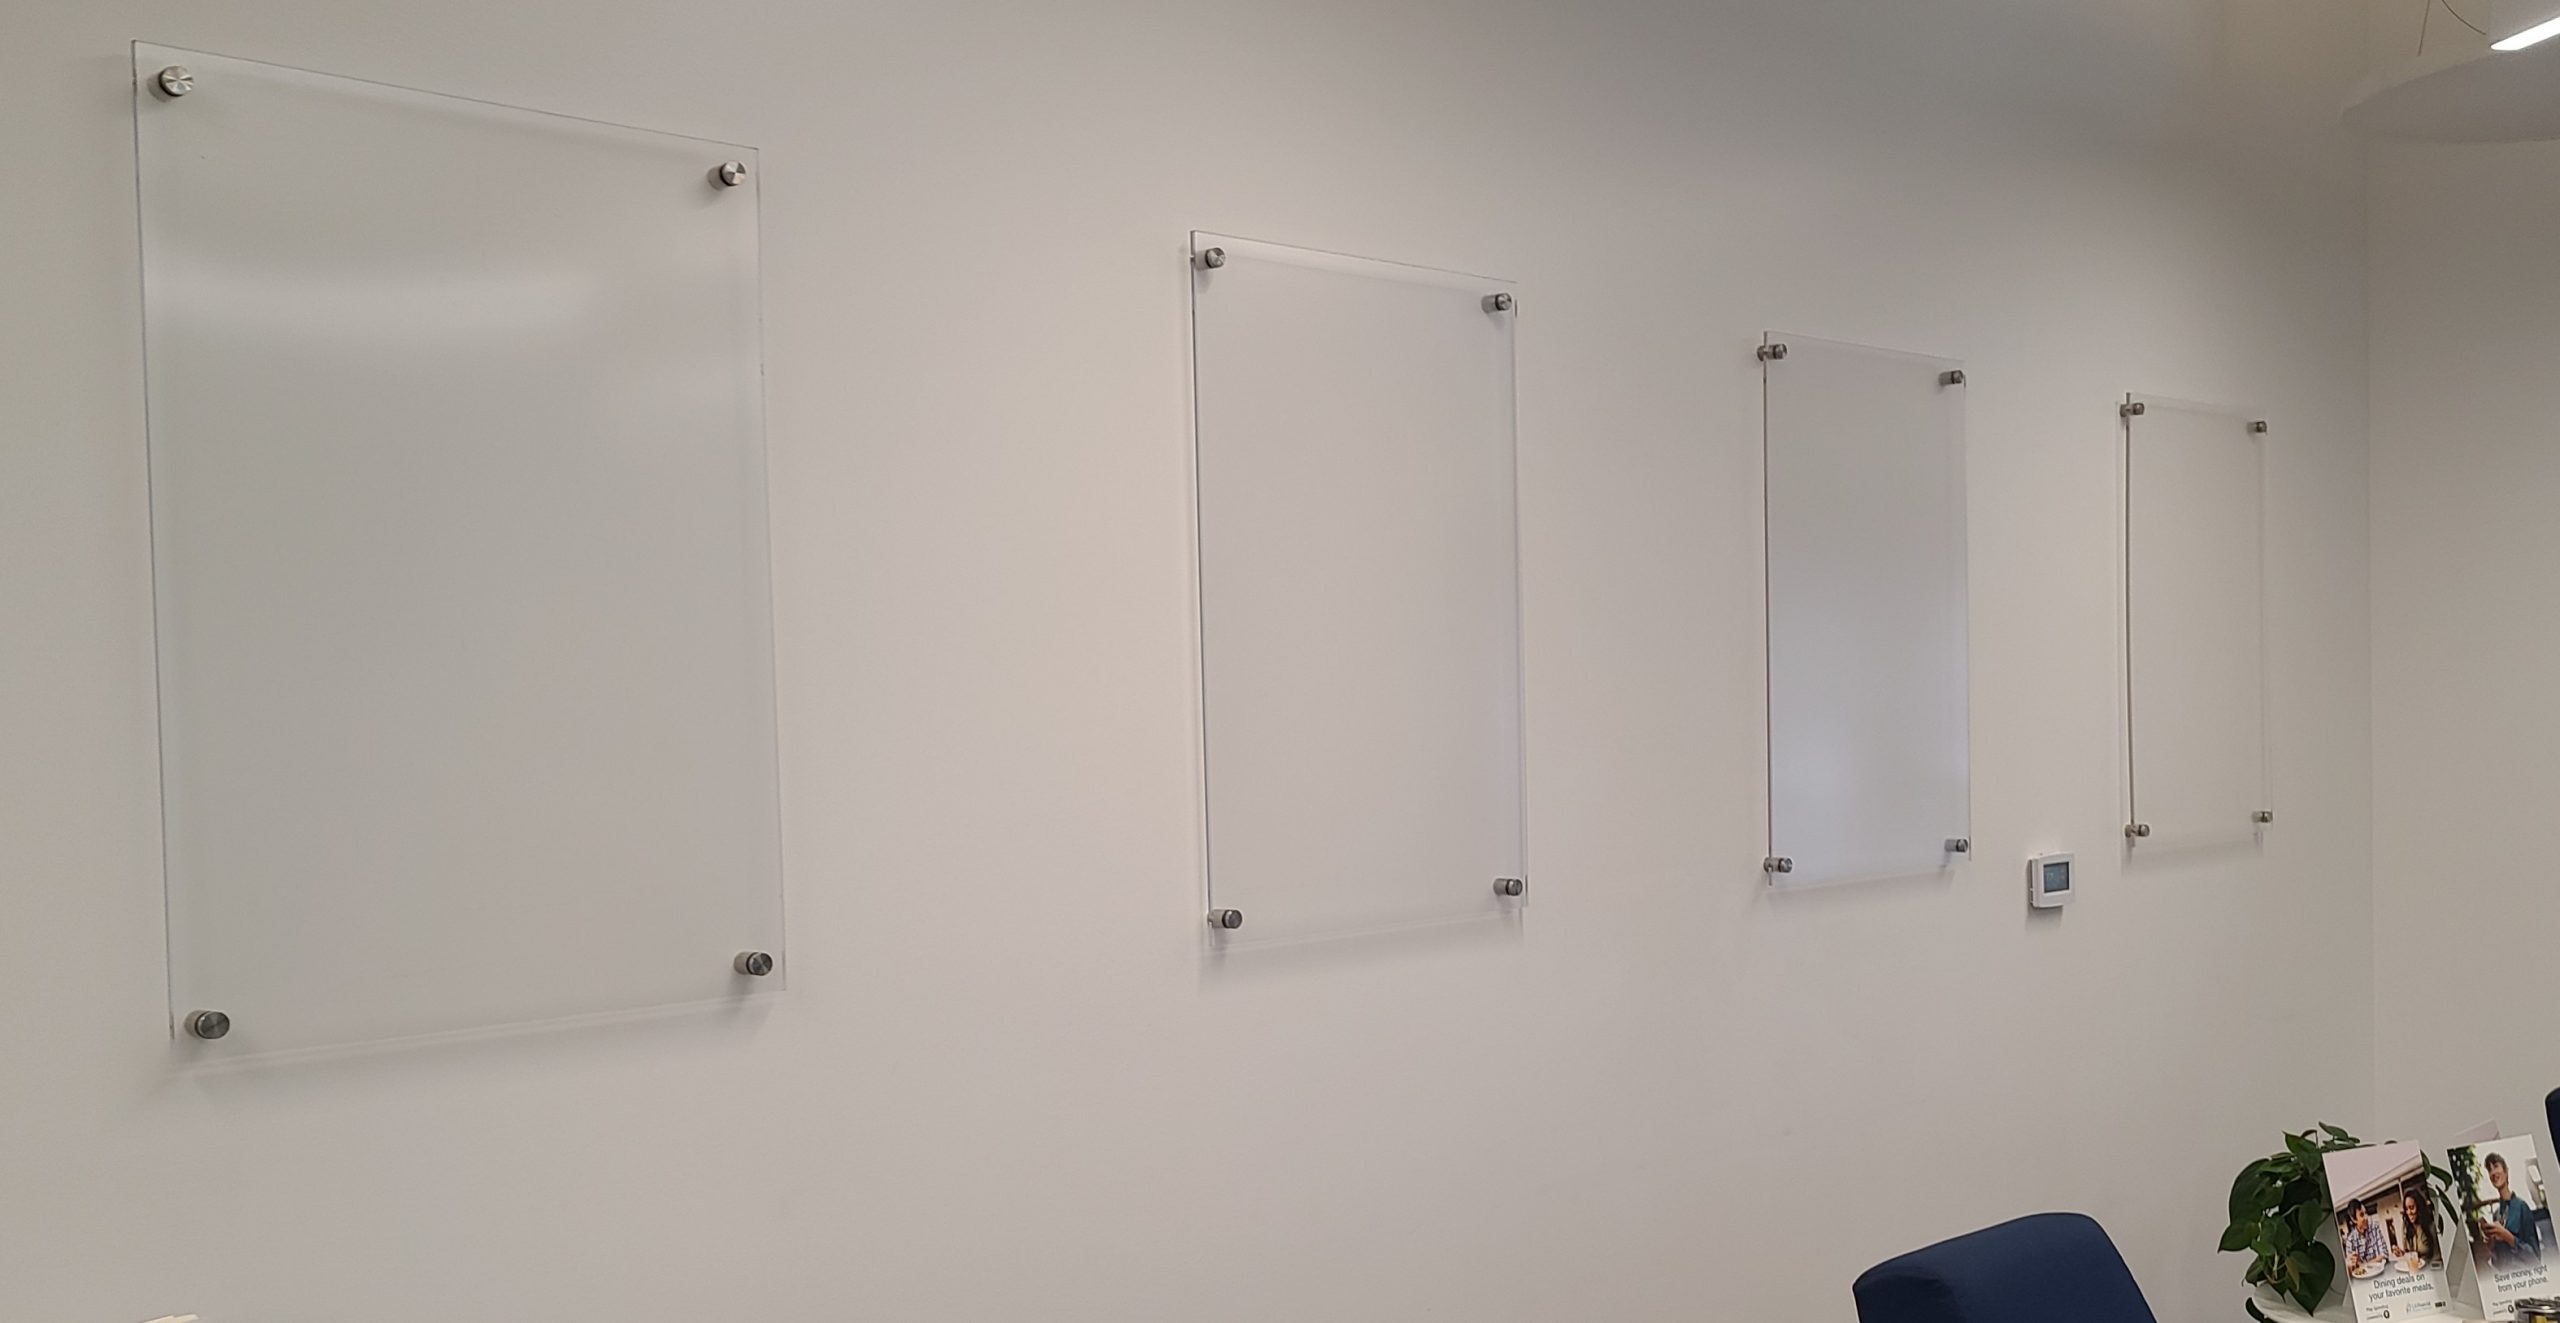 More from our office sign package for LA Financial, these are acrylic poster panels or poster holders for their Los Angeles office.